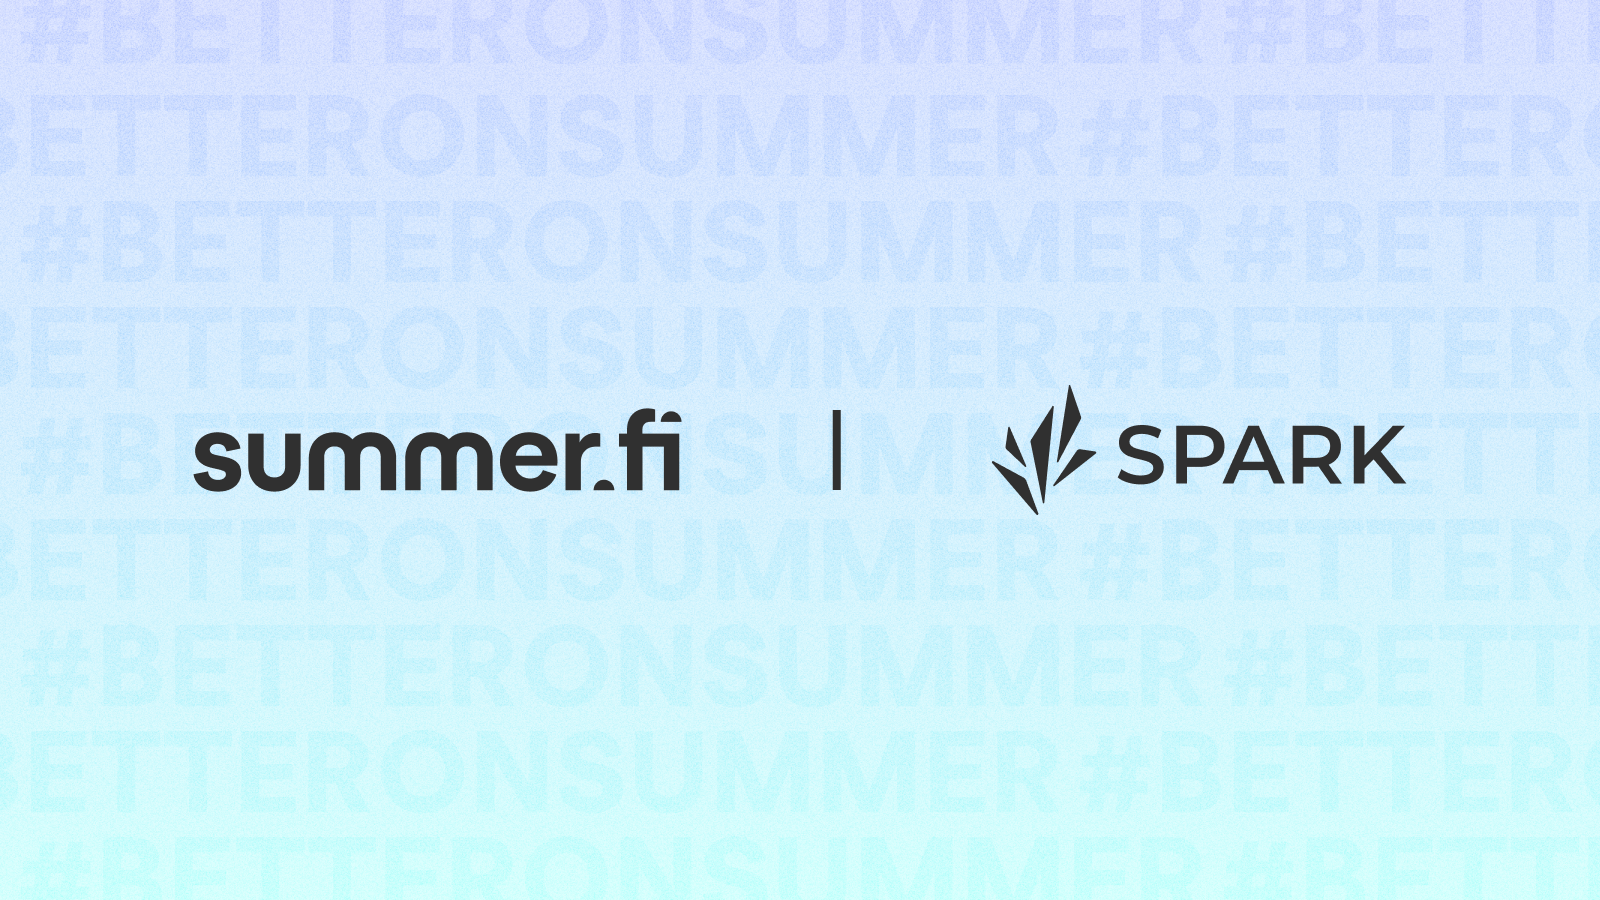 Move your Spark Position to Summer.fi and get Stop-Loss Protection & more!